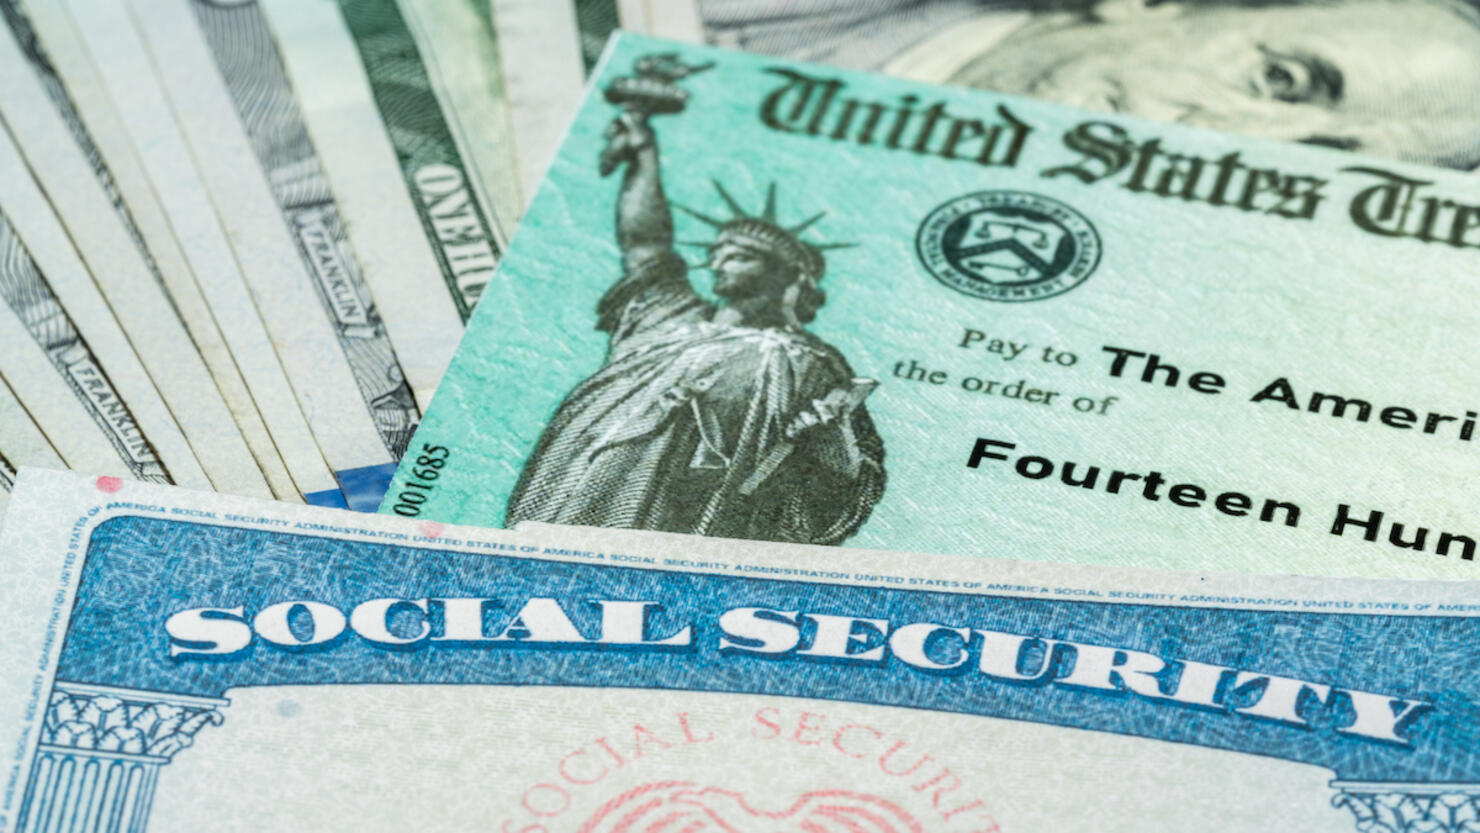 Illustration of the 2021 federal stimulus check from the IRS with cash and social security card